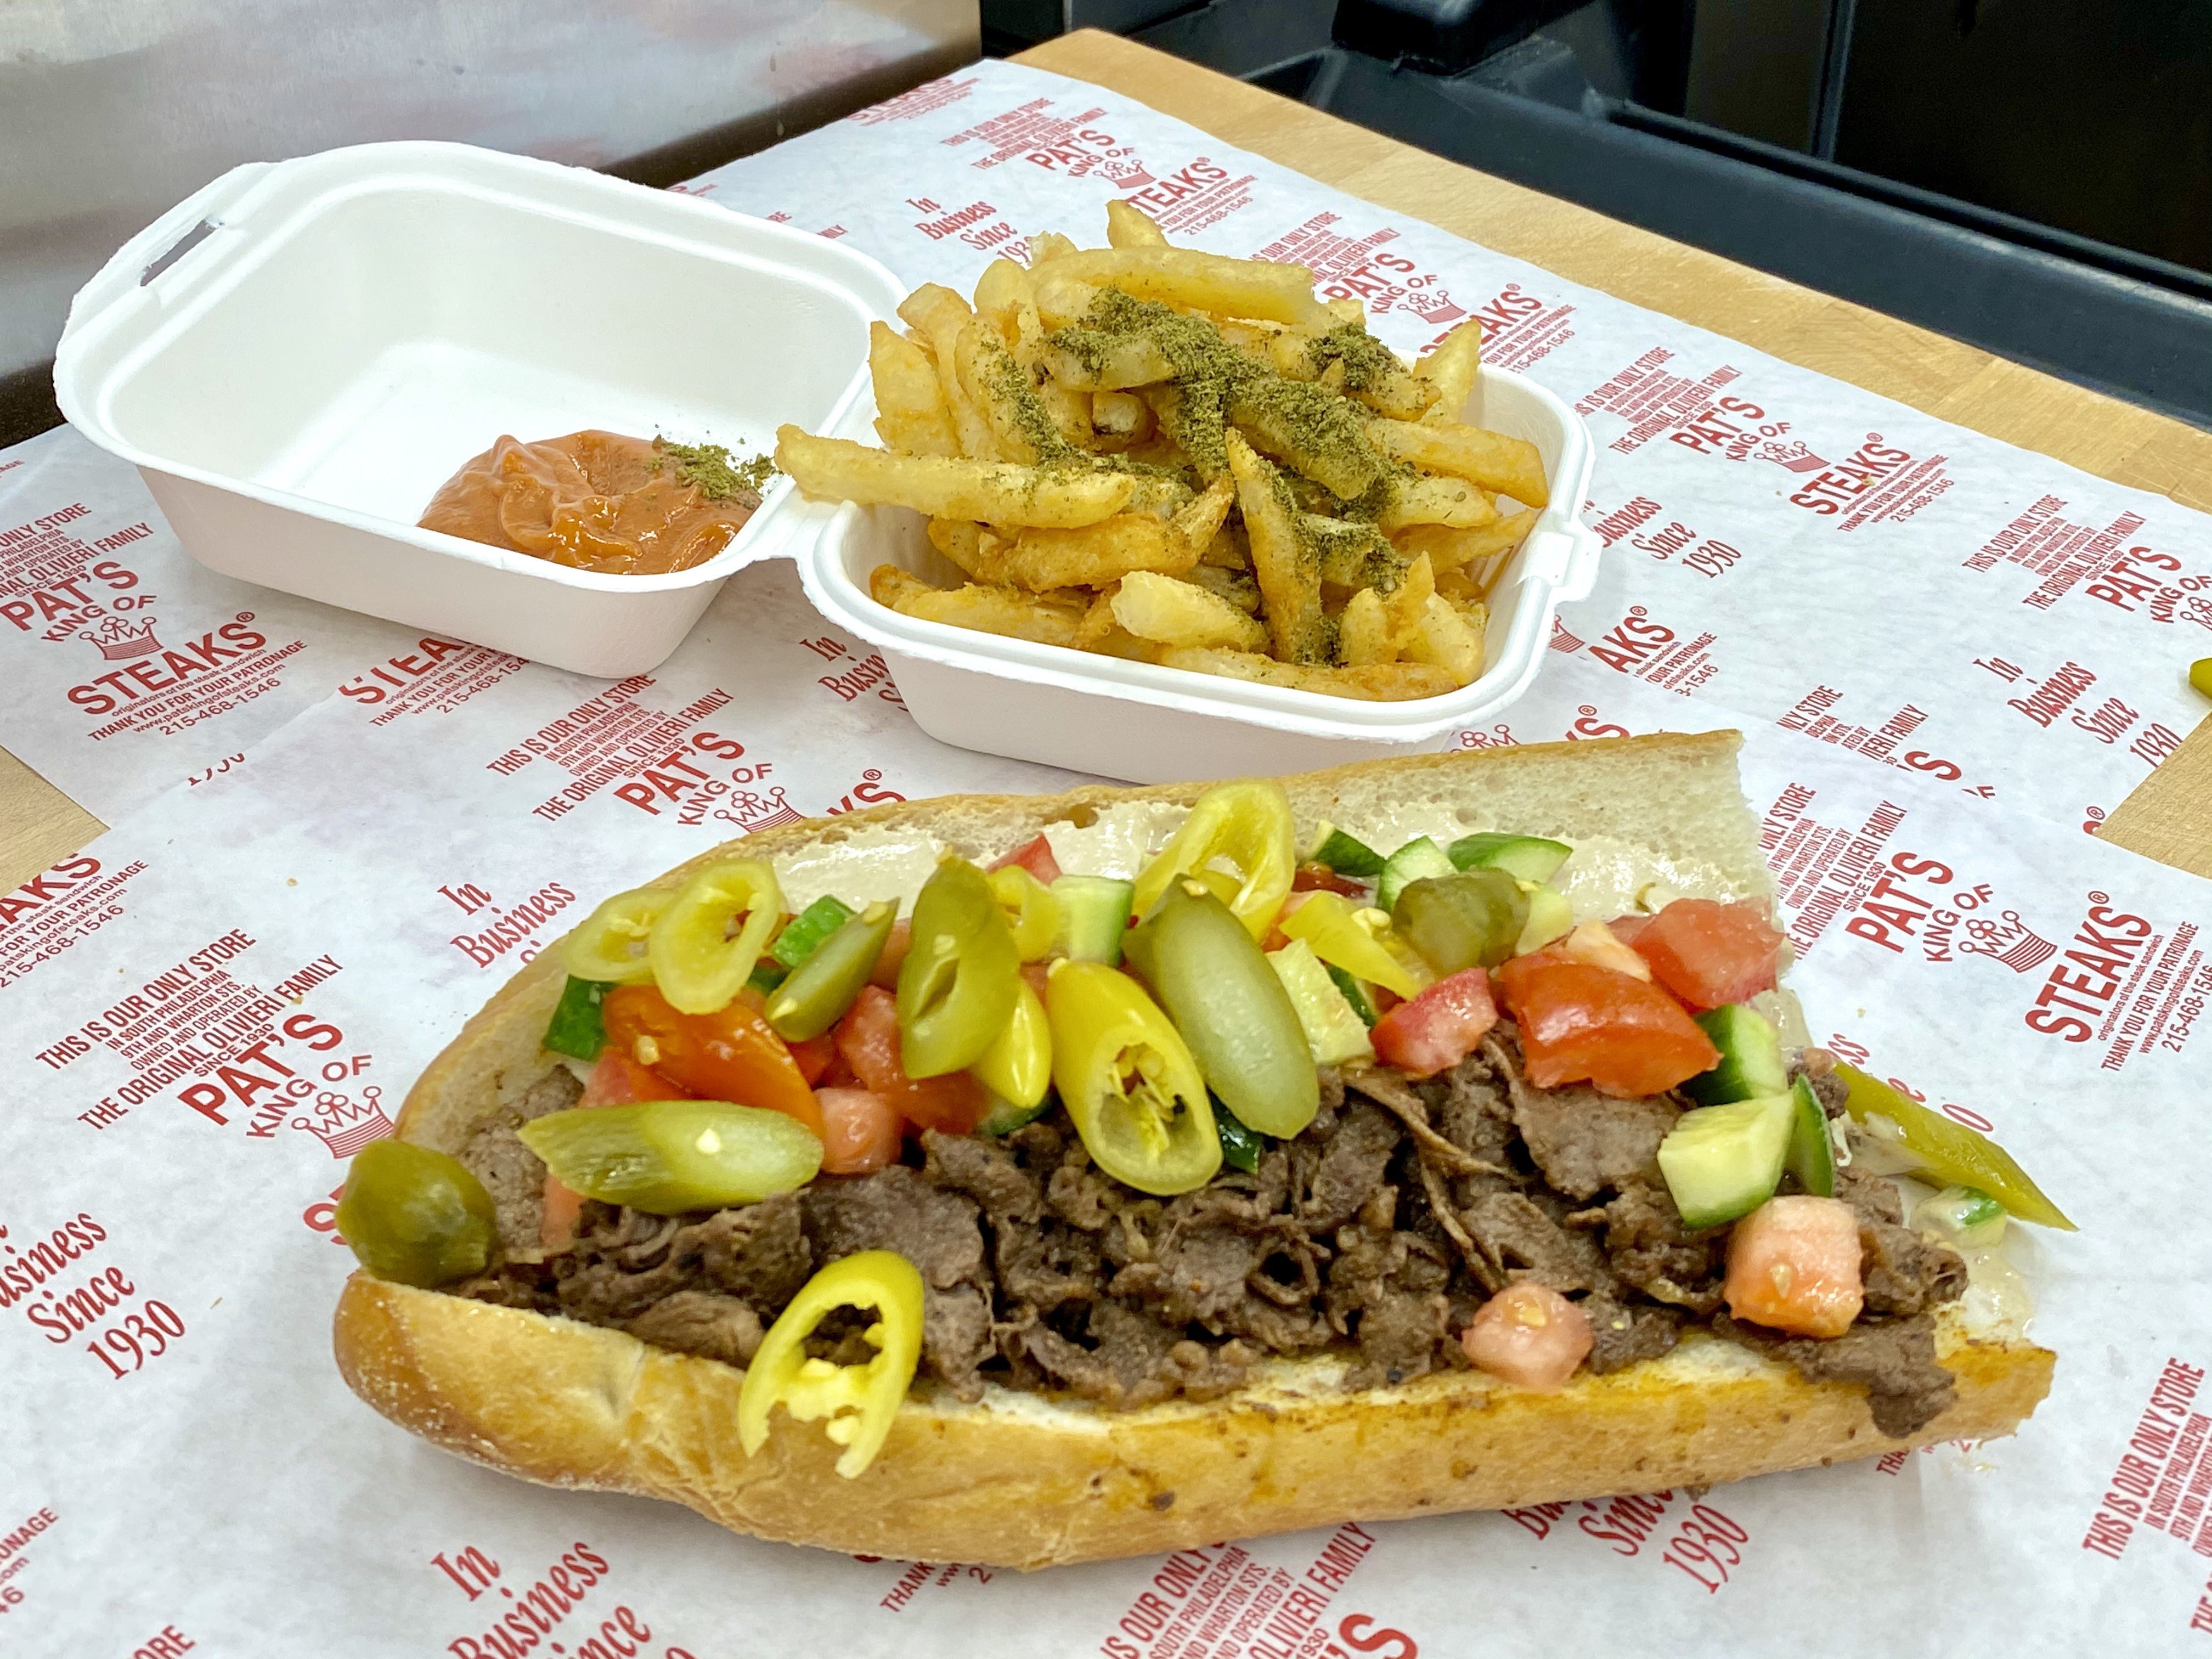 Philly Cheese Steaks, Chicago Steak Seasoning - The Spice House